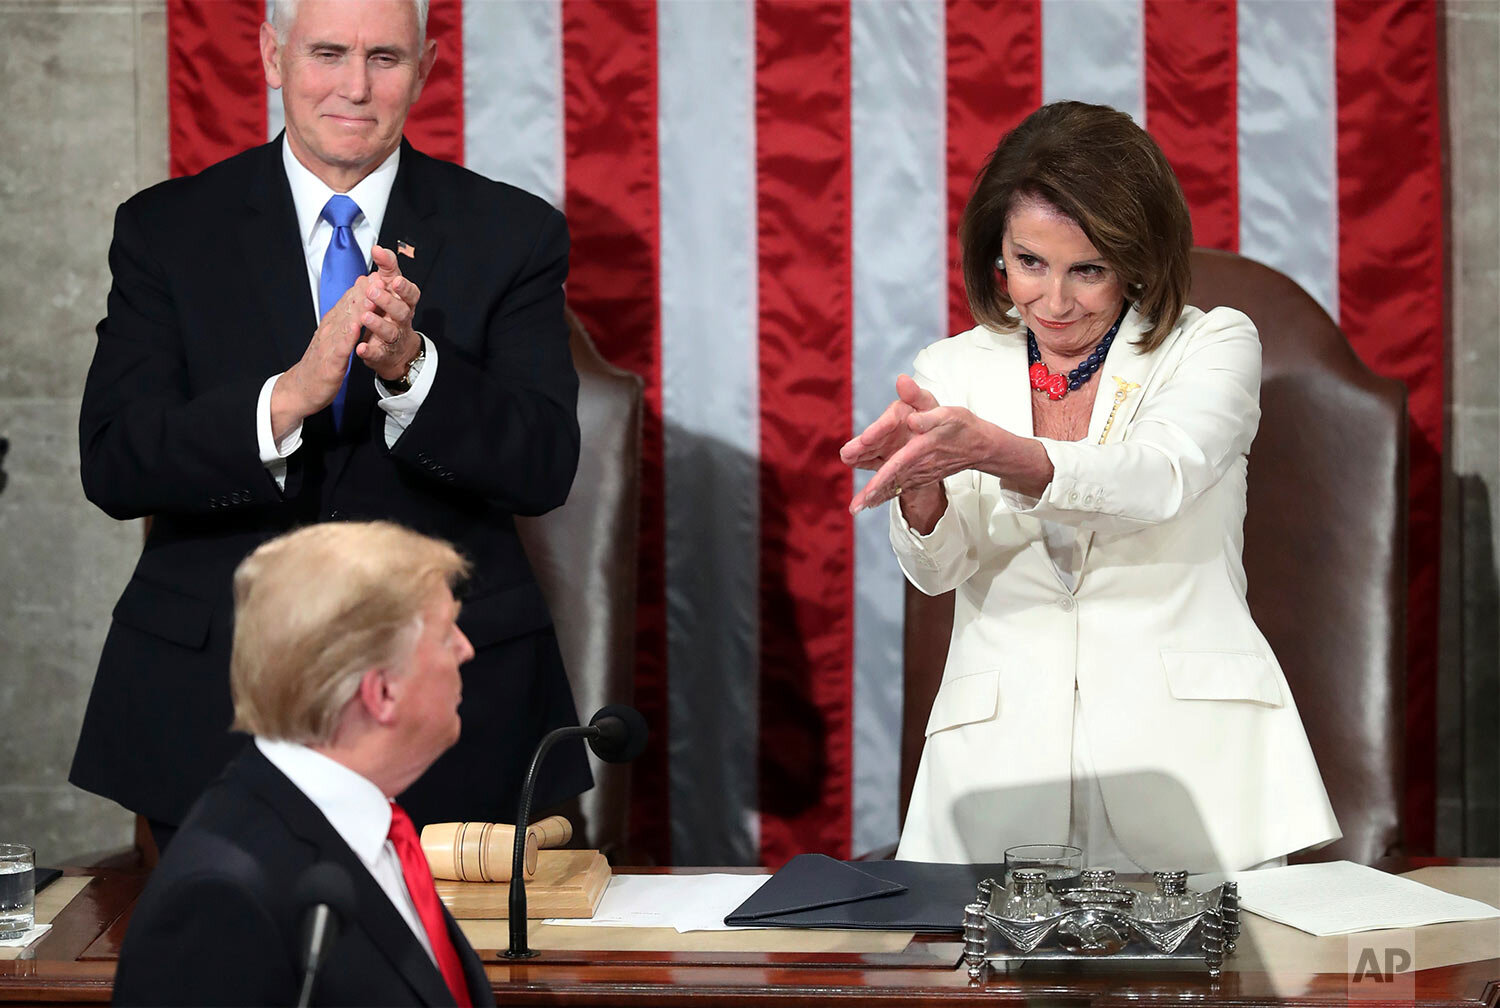  President Donald Trump turns to House Speaker Nancy Pelosi of Calif., as he delivers his State of the Union address to a joint session of Congress on Capitol Hill in Washington, as Vice President Mike Pence watches, on Feb. 5, 2019. (AP Photo/Andrew